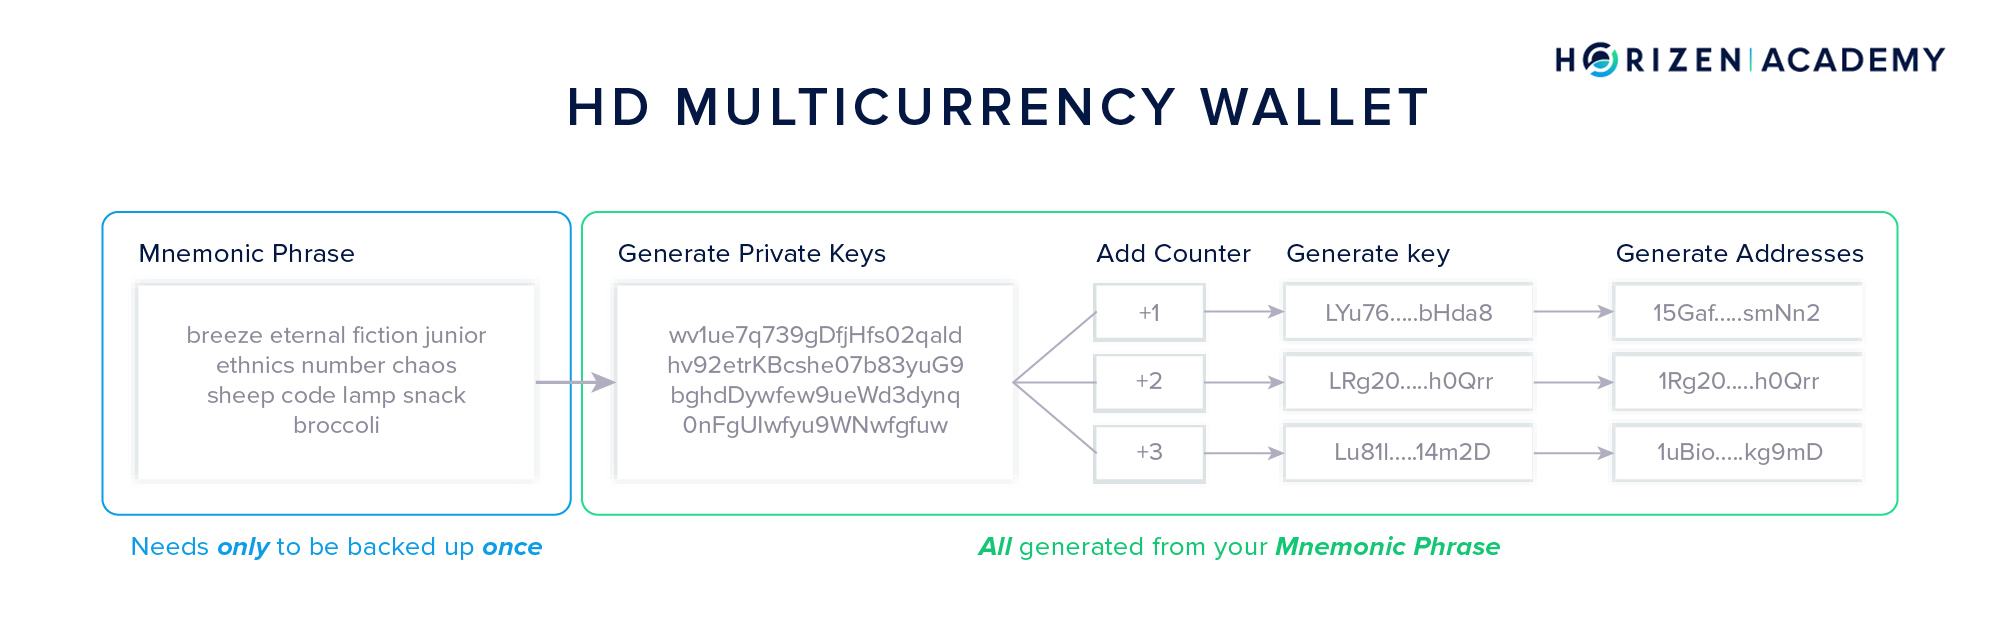 Hierarchical Deterministic Wallet